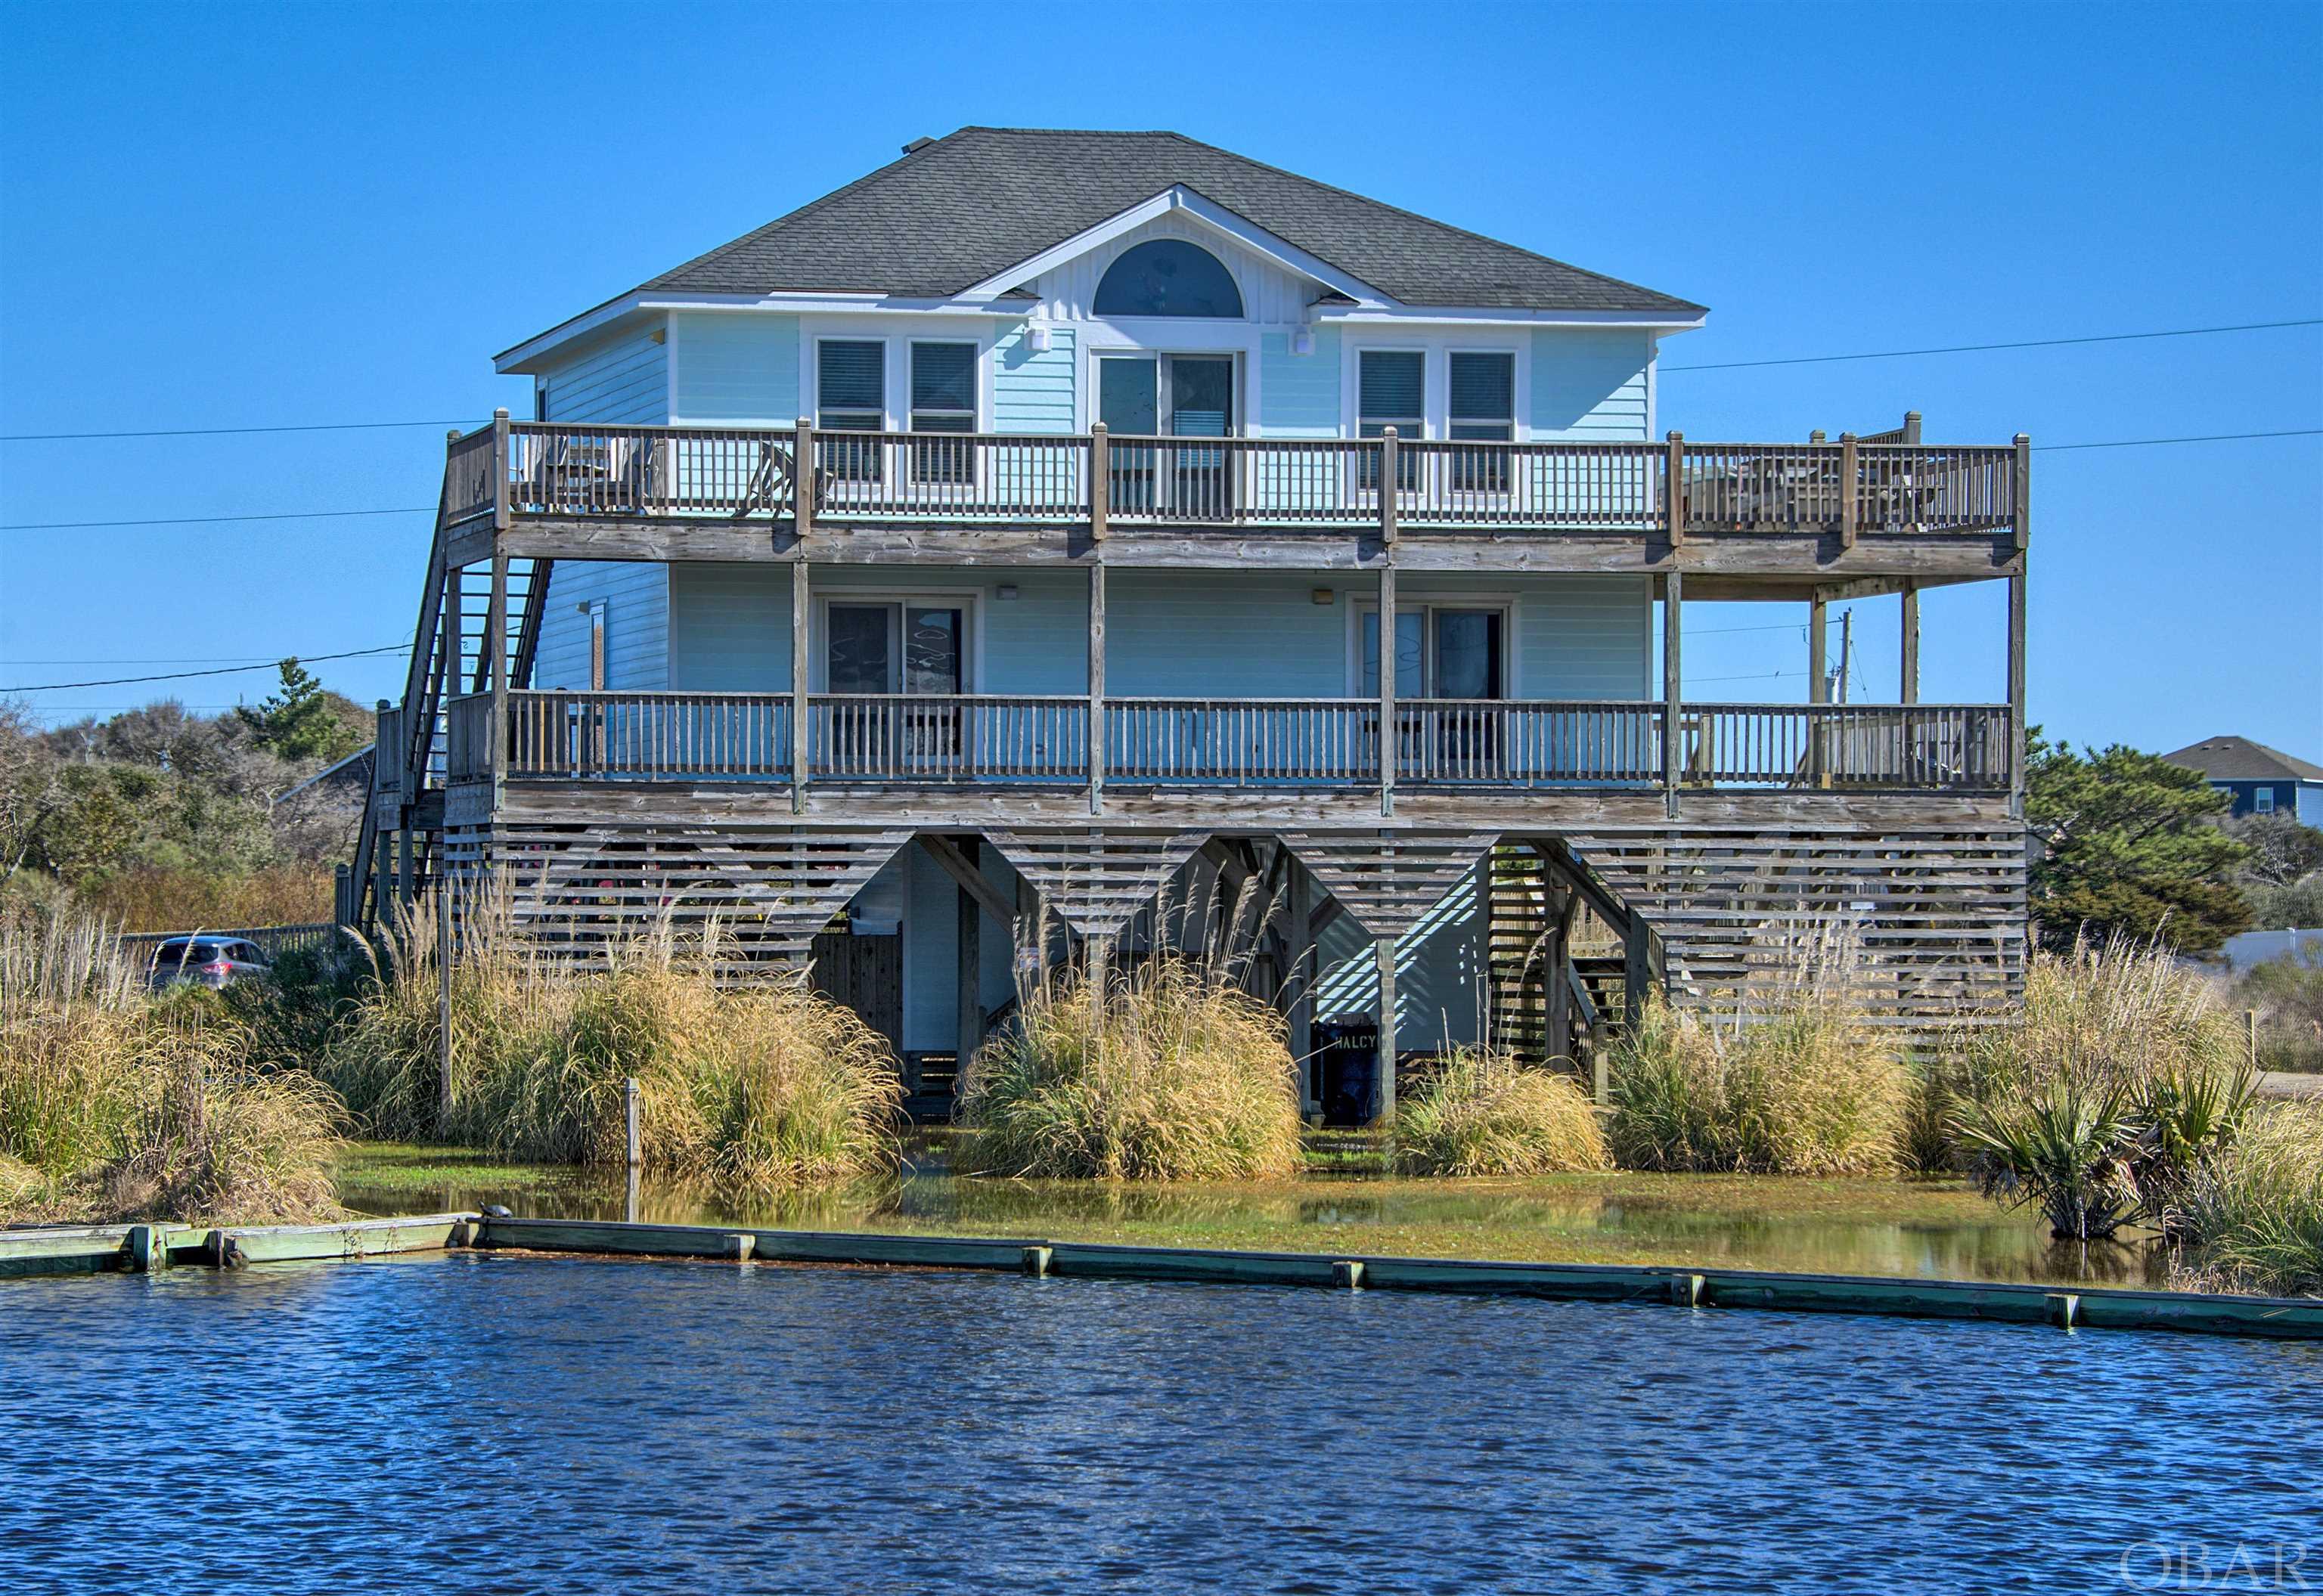 56186 Lonesome Valley Road, Hatteras, NC 27943, 4 Bedrooms Bedrooms, ,2 BathroomsBathrooms,Residential,For sale,Lonesome Valley Road,124996